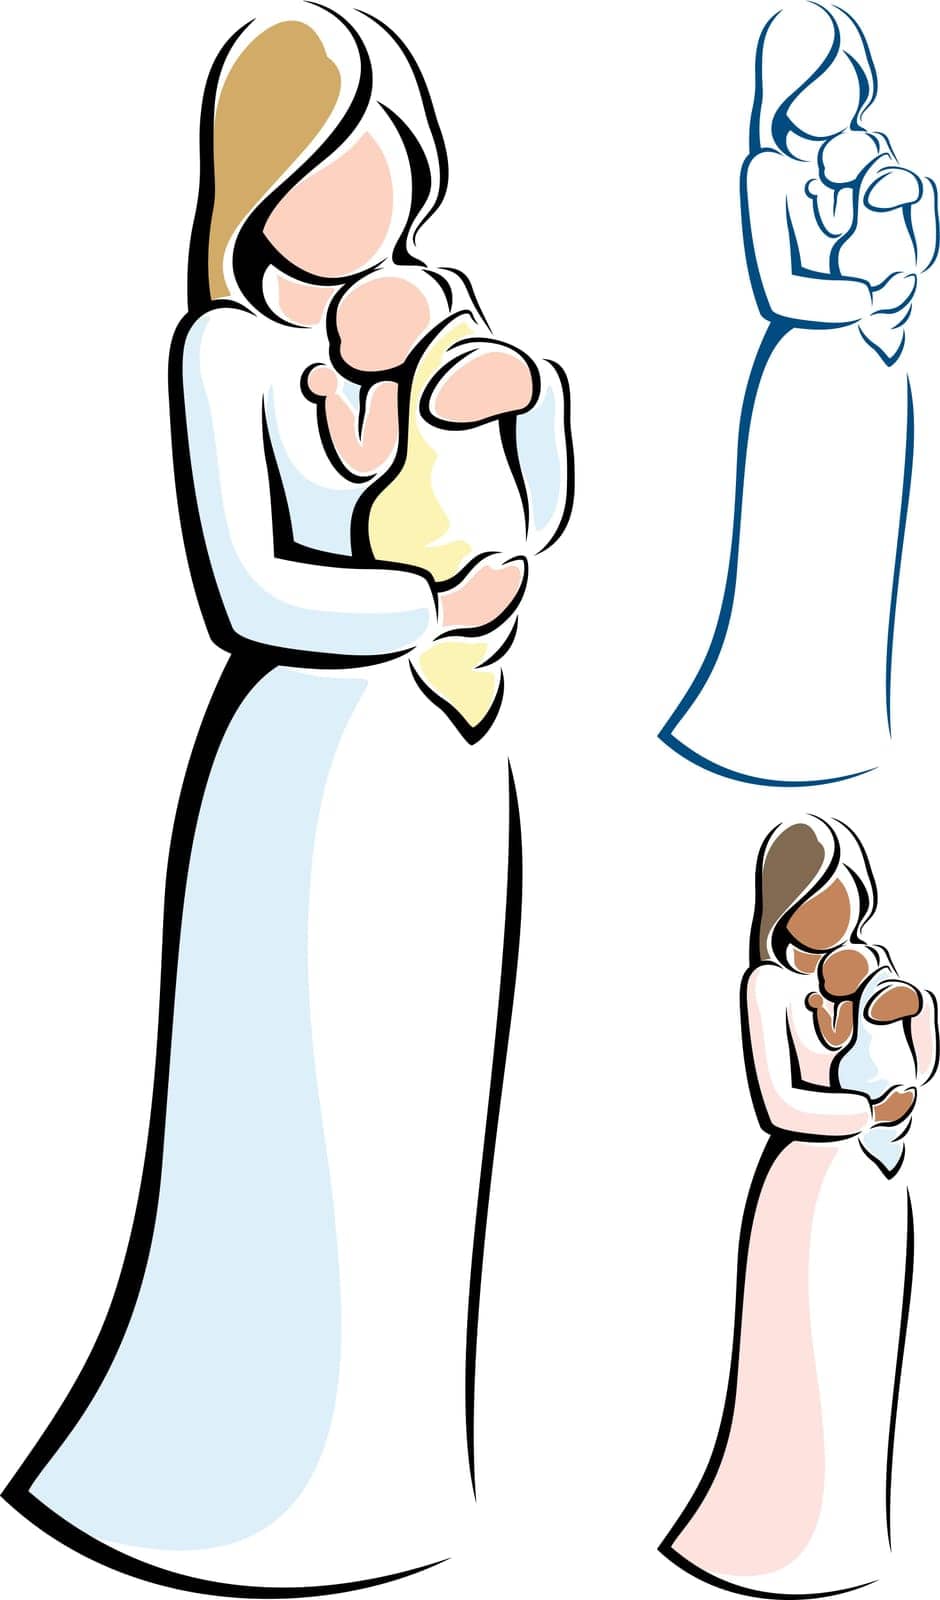 Stylized illustration of mother and child.